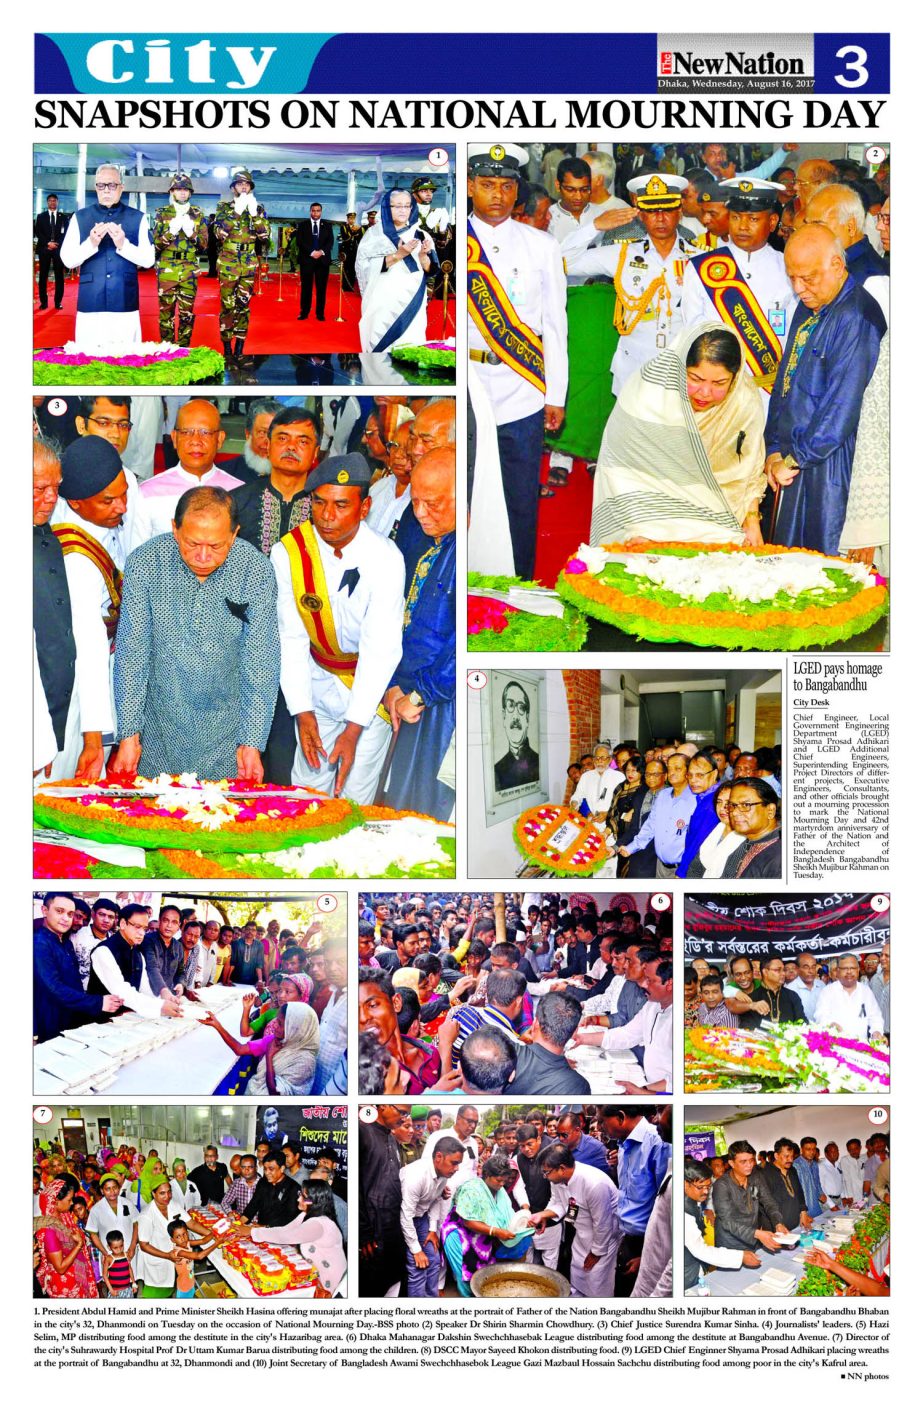 1. President Abdul Hamid and Prime Minister Sheikh Hasina offering munajat after placing floral wreaths at the portrait of Father of the Nation Bangabandhu Sheikh Mujibur Rahman in front of Bangabandhu Bhaban in the city's 32, Dhanmondi on Tuesday on t